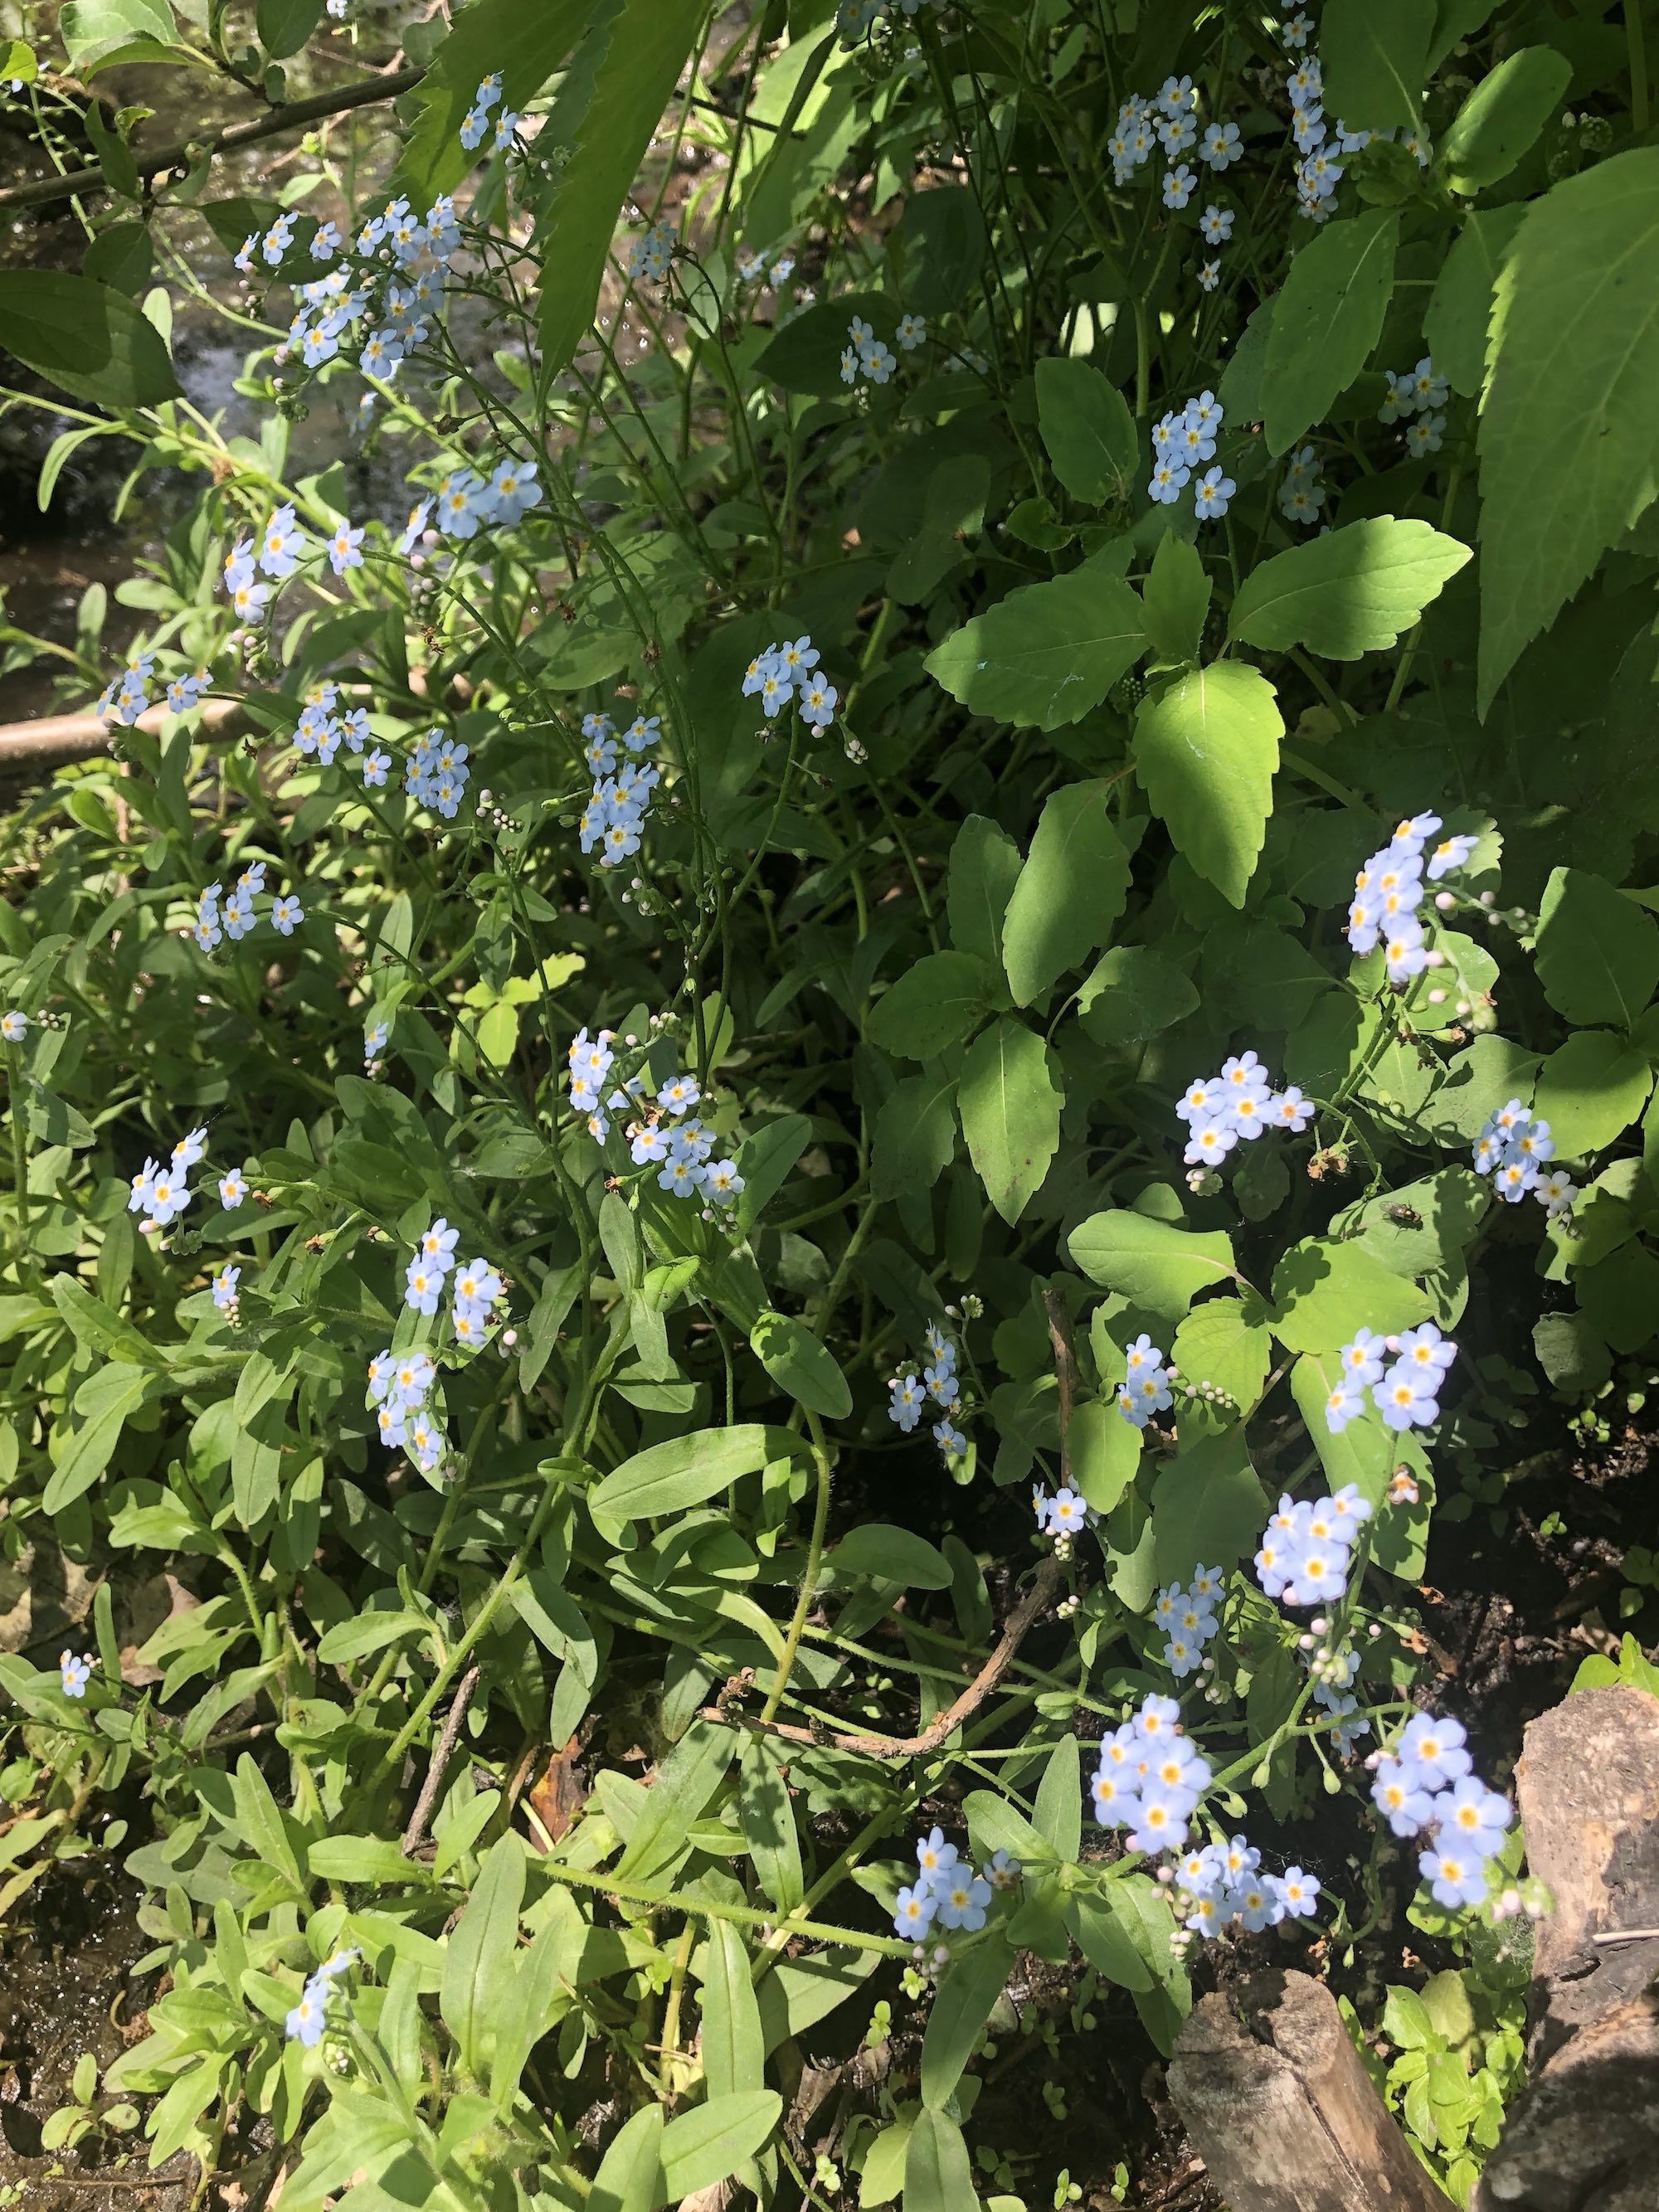 True Forget-me-not in Ho-Nee-Un Pond in Madison, Wisconsin on June 2, 2021.